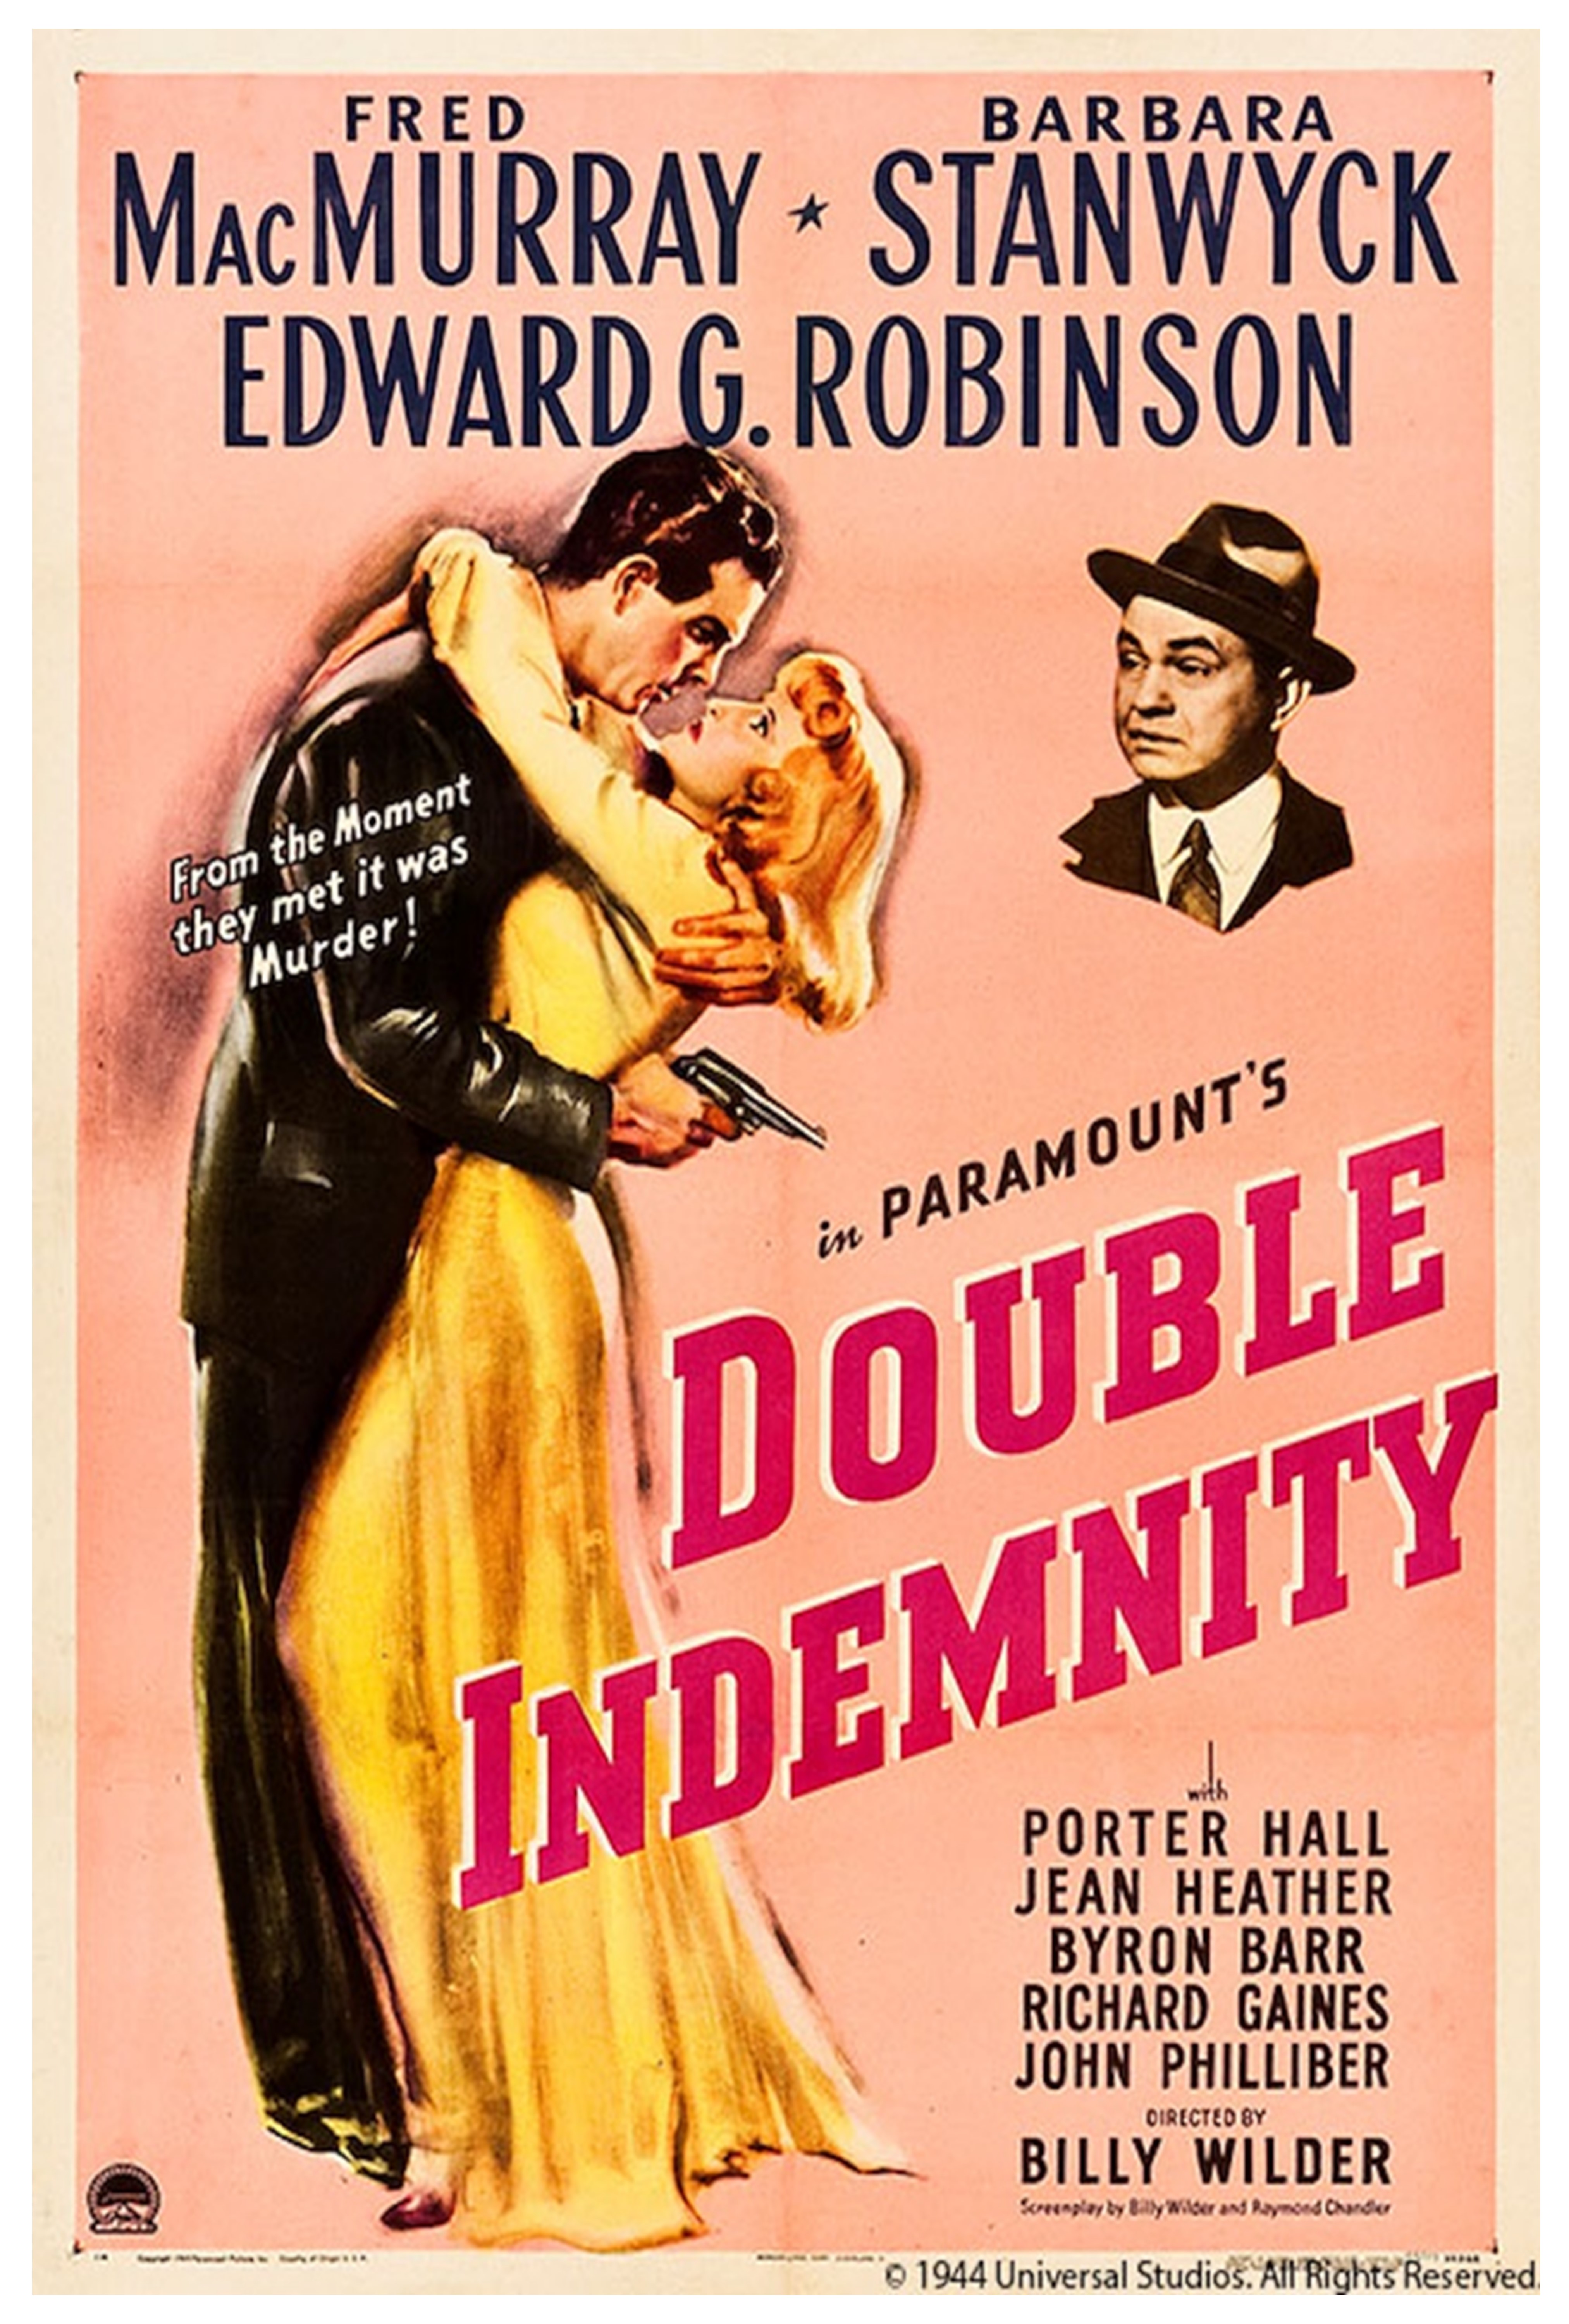 Red letters on peach background showing a man and woman embracing with a detective looking on.